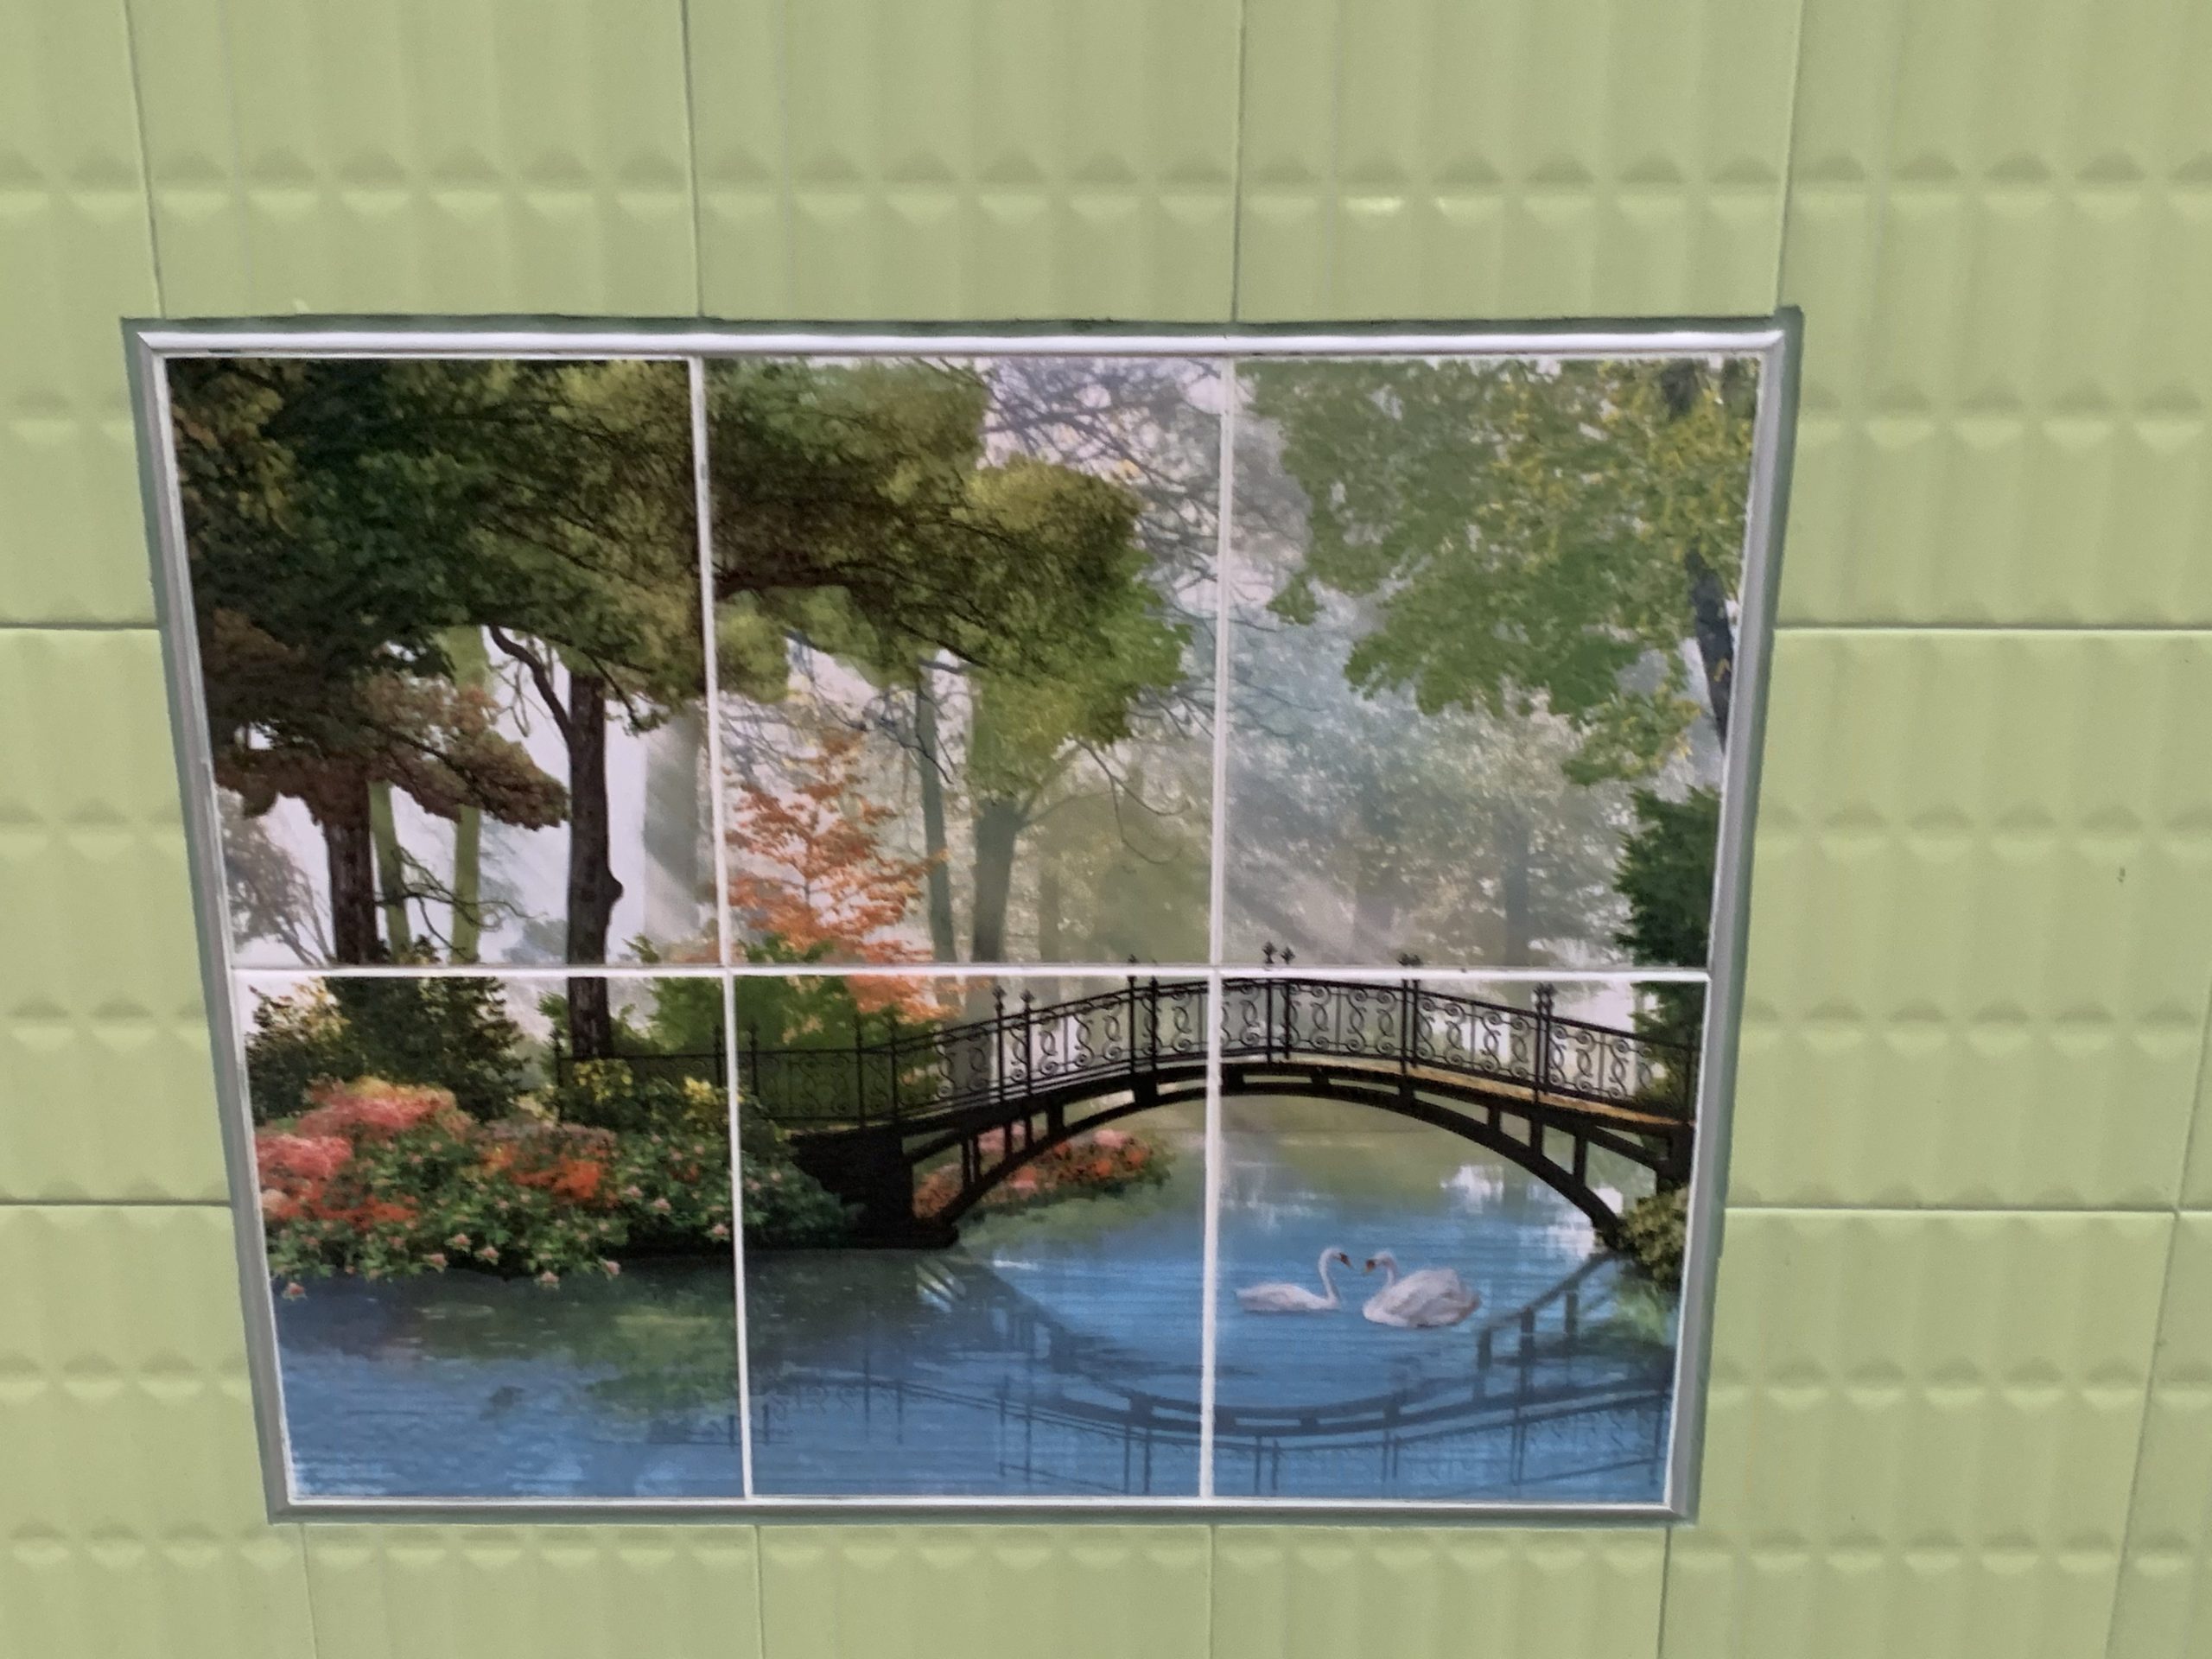 a tile wall with a bridge and swans